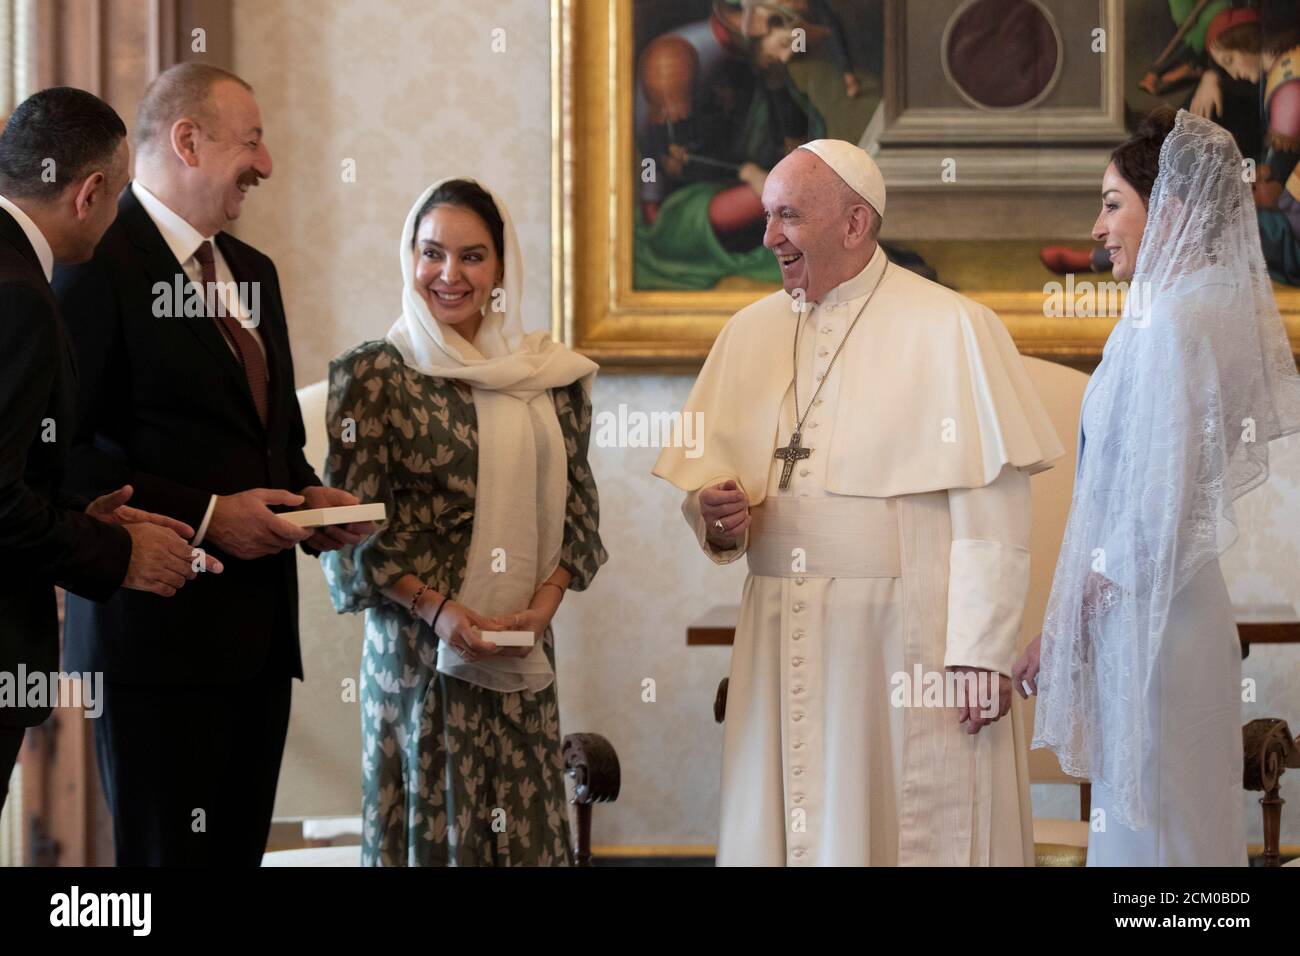 Pope Francis talks with President of Azerbaijan Ilham Aliyev, his daughter Leyla Aliyeva, and his wife Mehriban Aliyeva during a private audience at the Vatican, February 22, 2020. Alessandra Tarantino/Pool via REUTERS Stock Photo